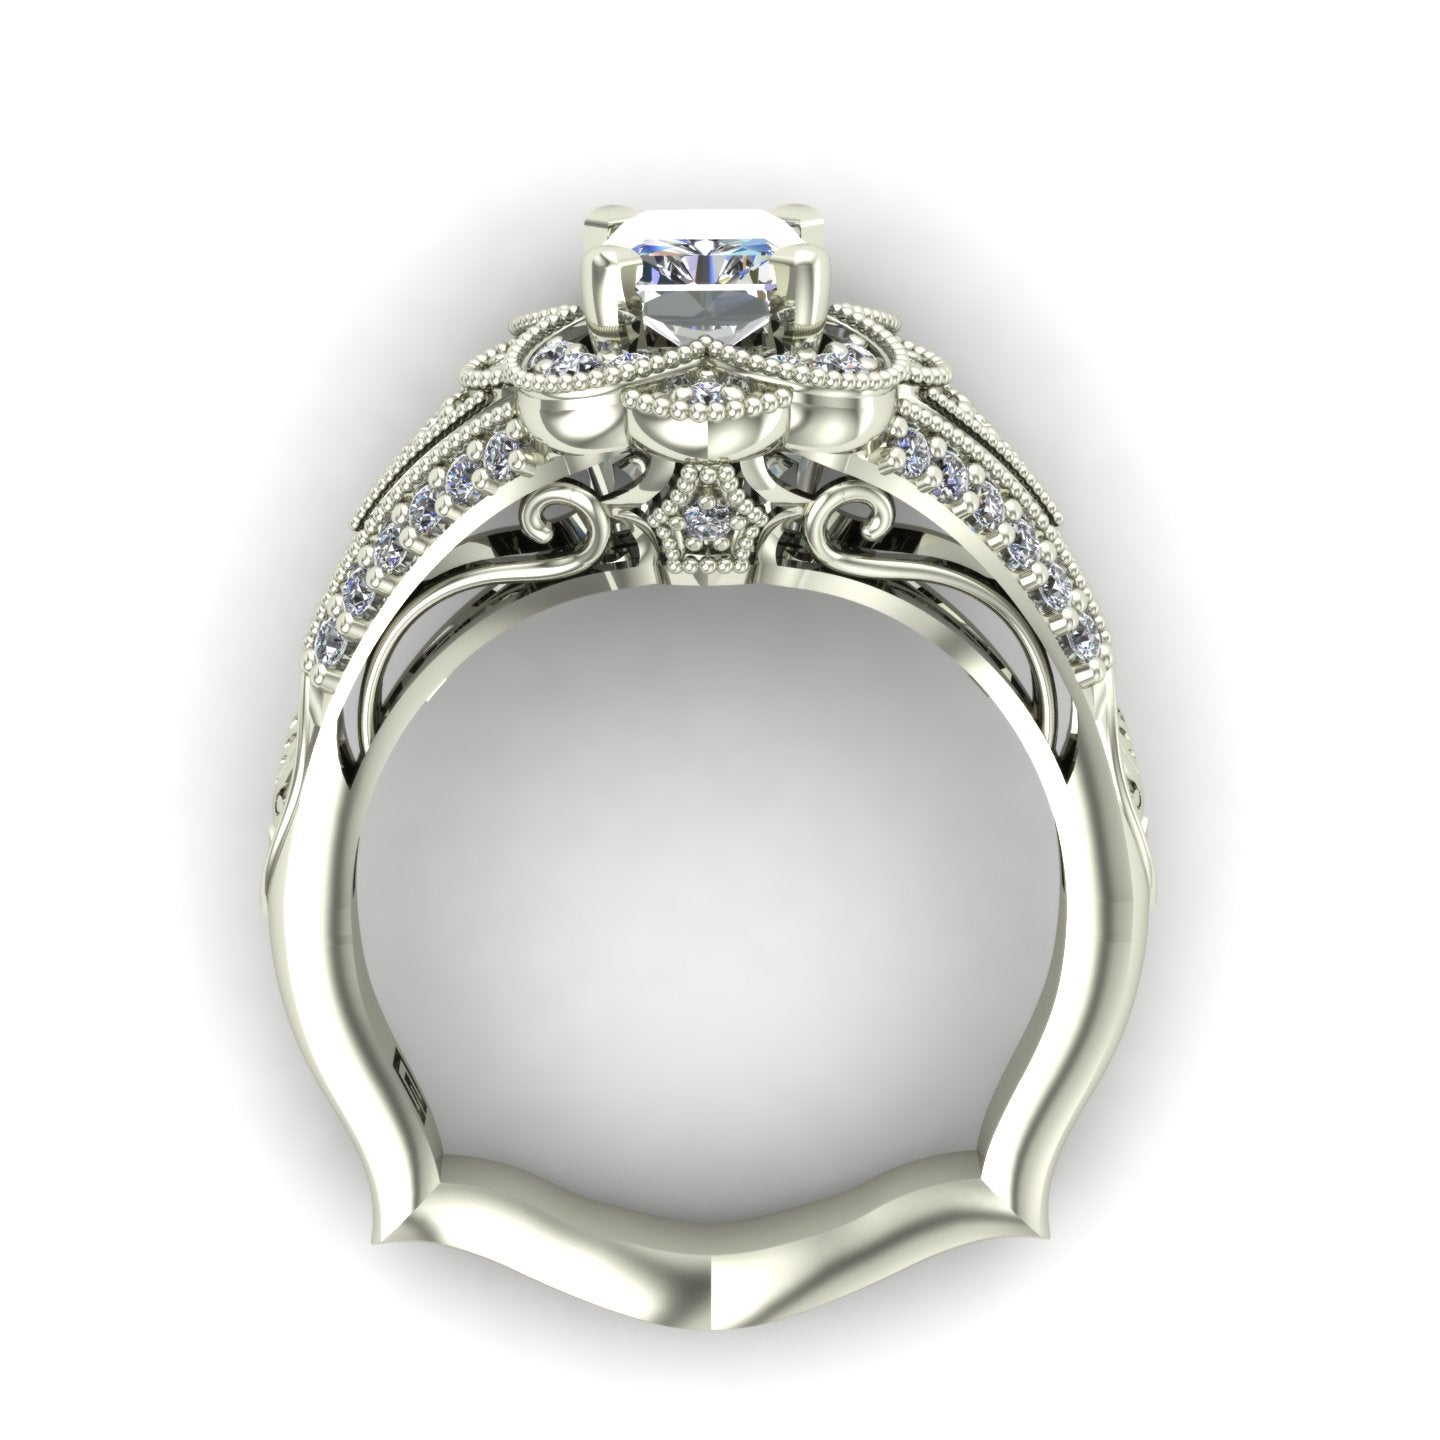 one carat radiant cut diamond scallop halo engagement ring in 14k white gold - Charles Babb Designs - through finger view